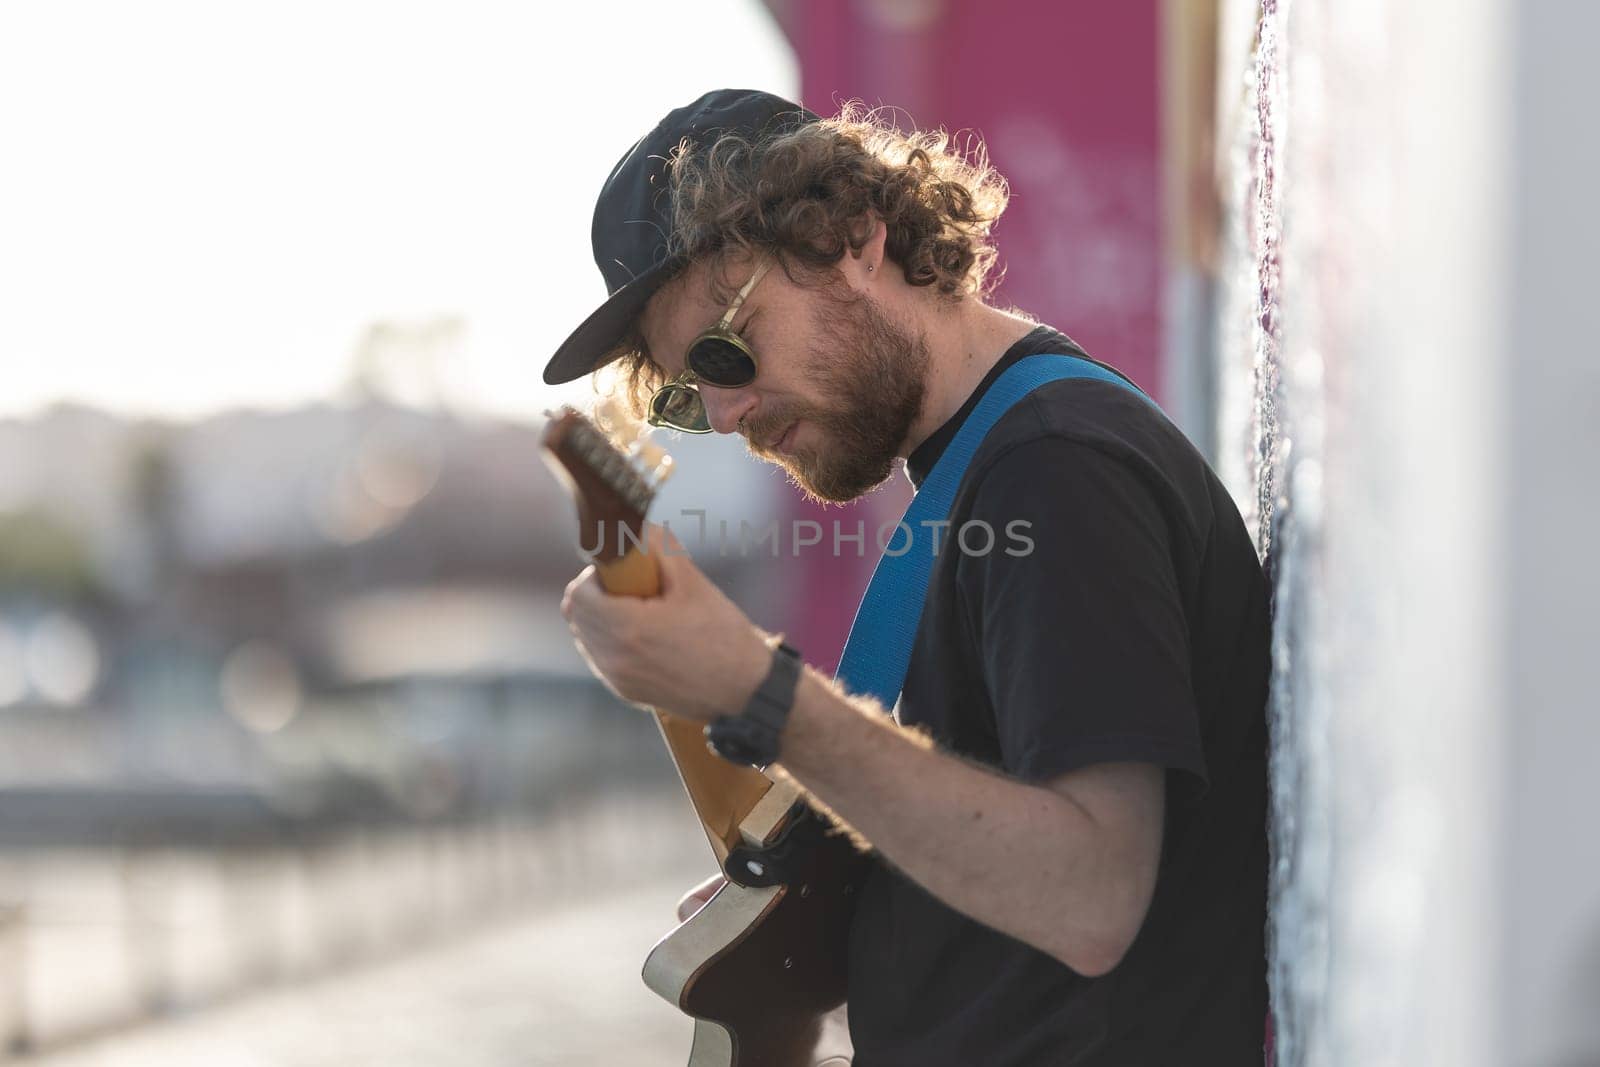 A man hipster standing by the wall and playing guitar. Mid shot